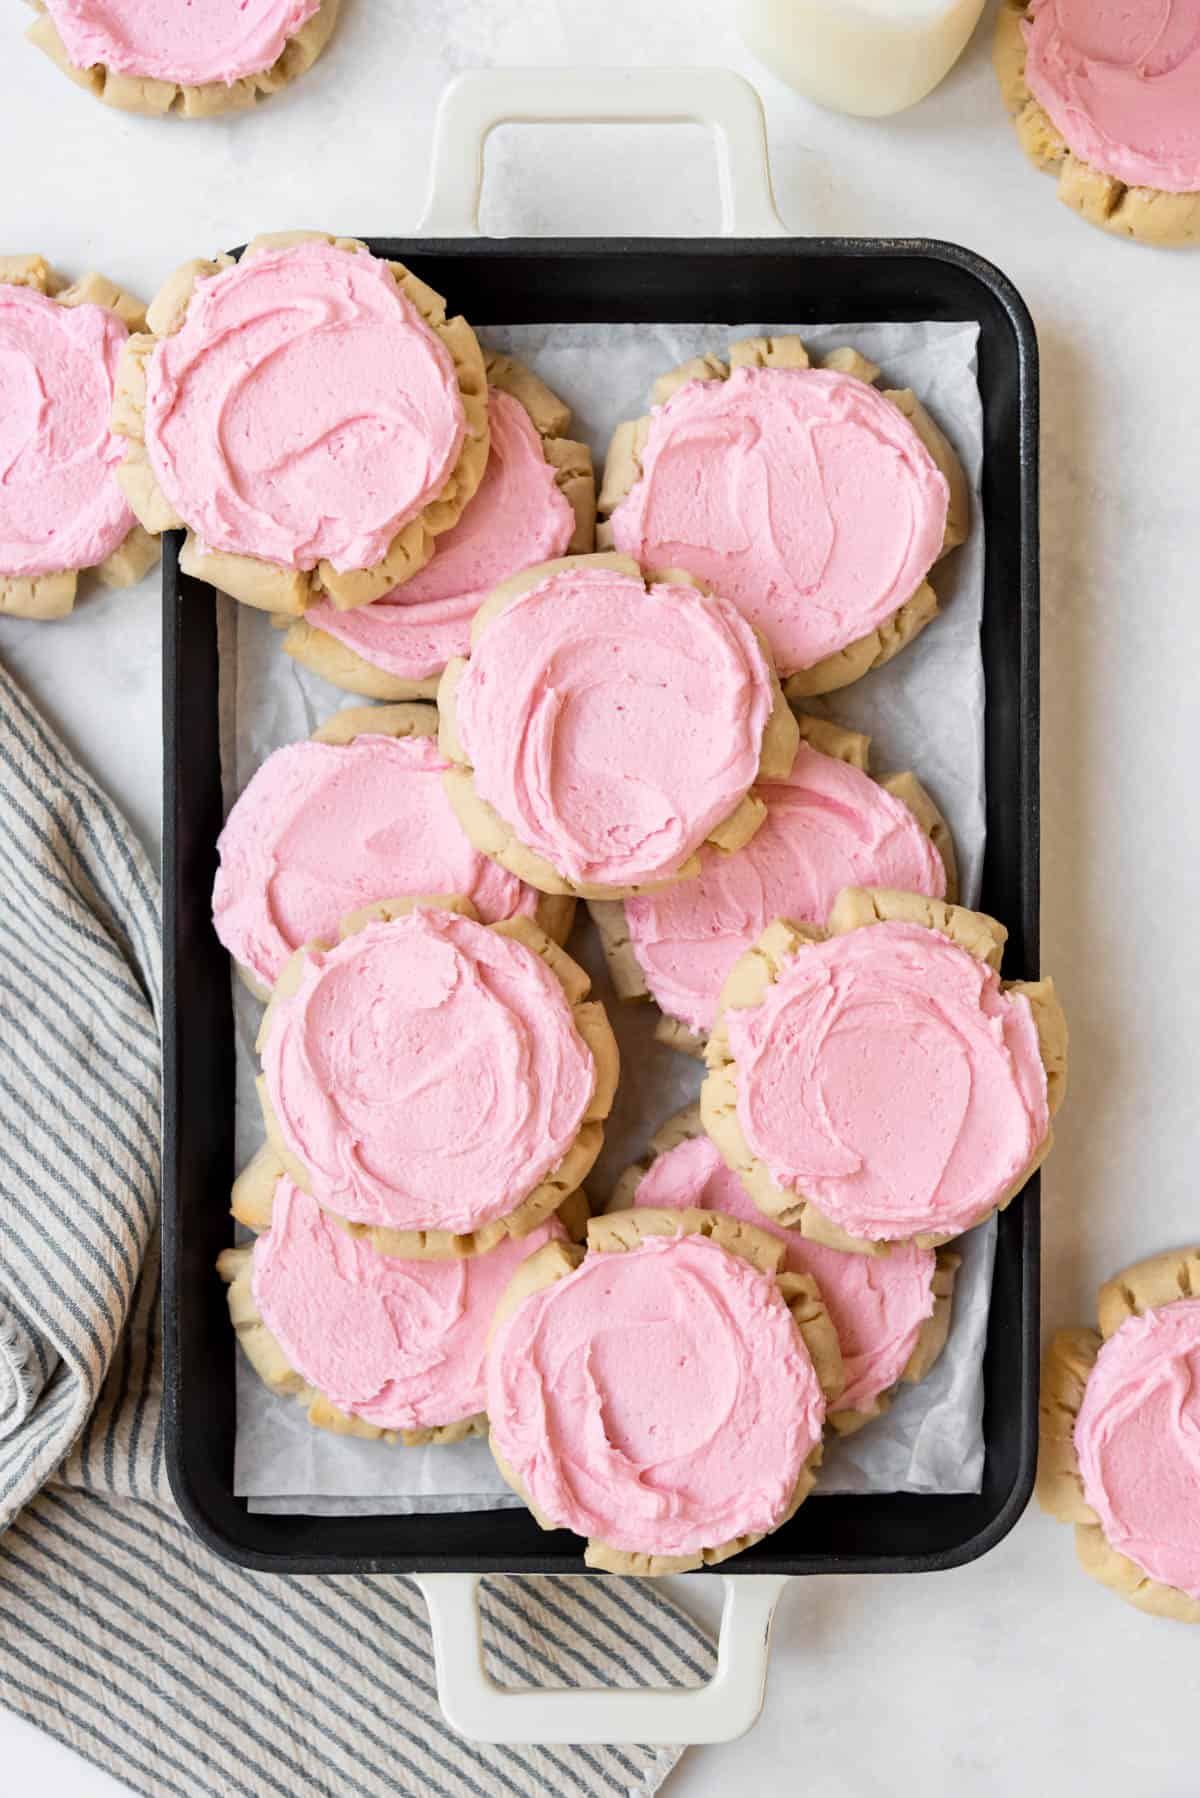 An overhead image of pink frosted sugar cookies arranged on a serving tray.